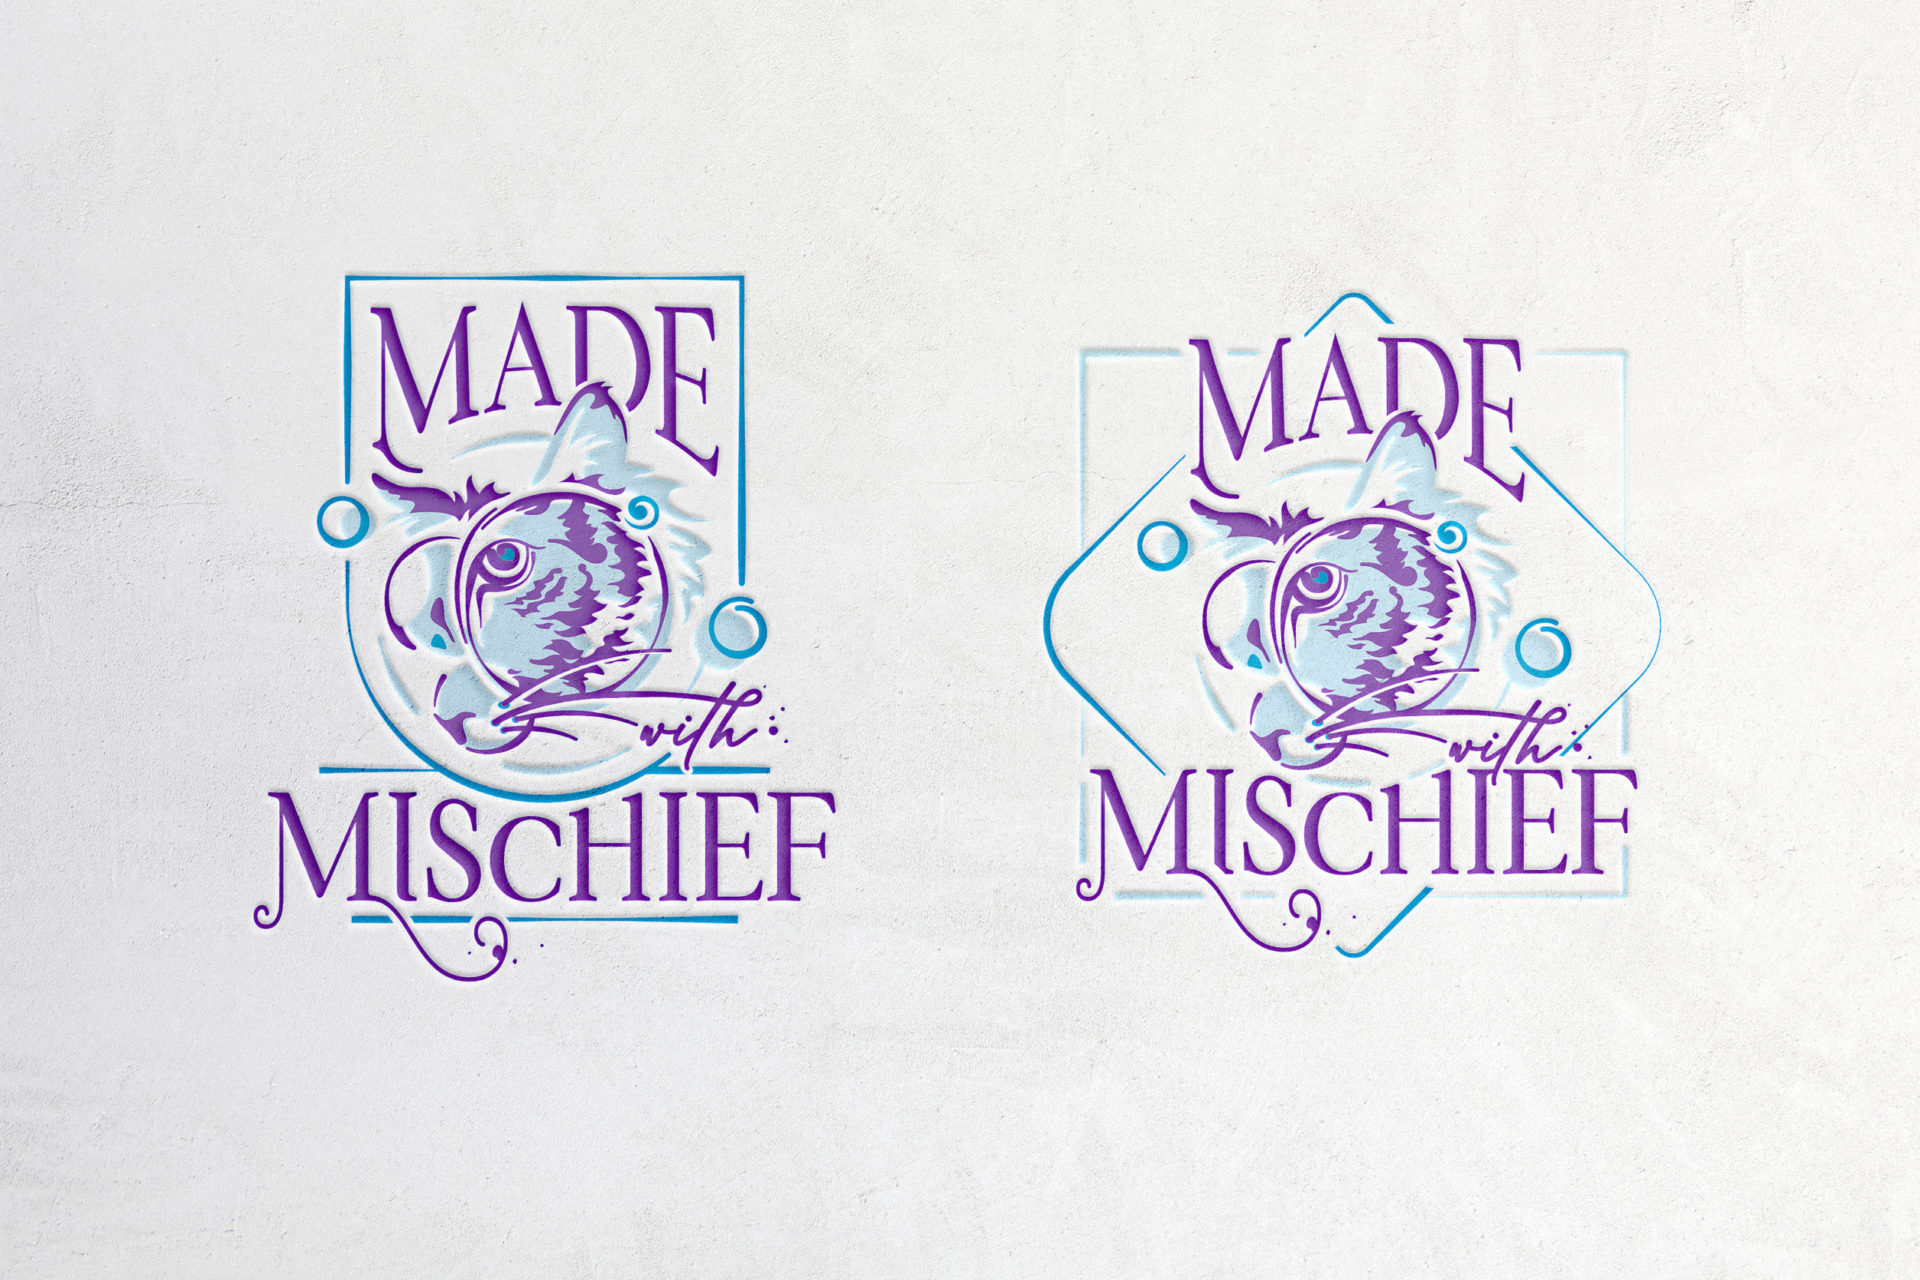 Made with Mischief Identity Package